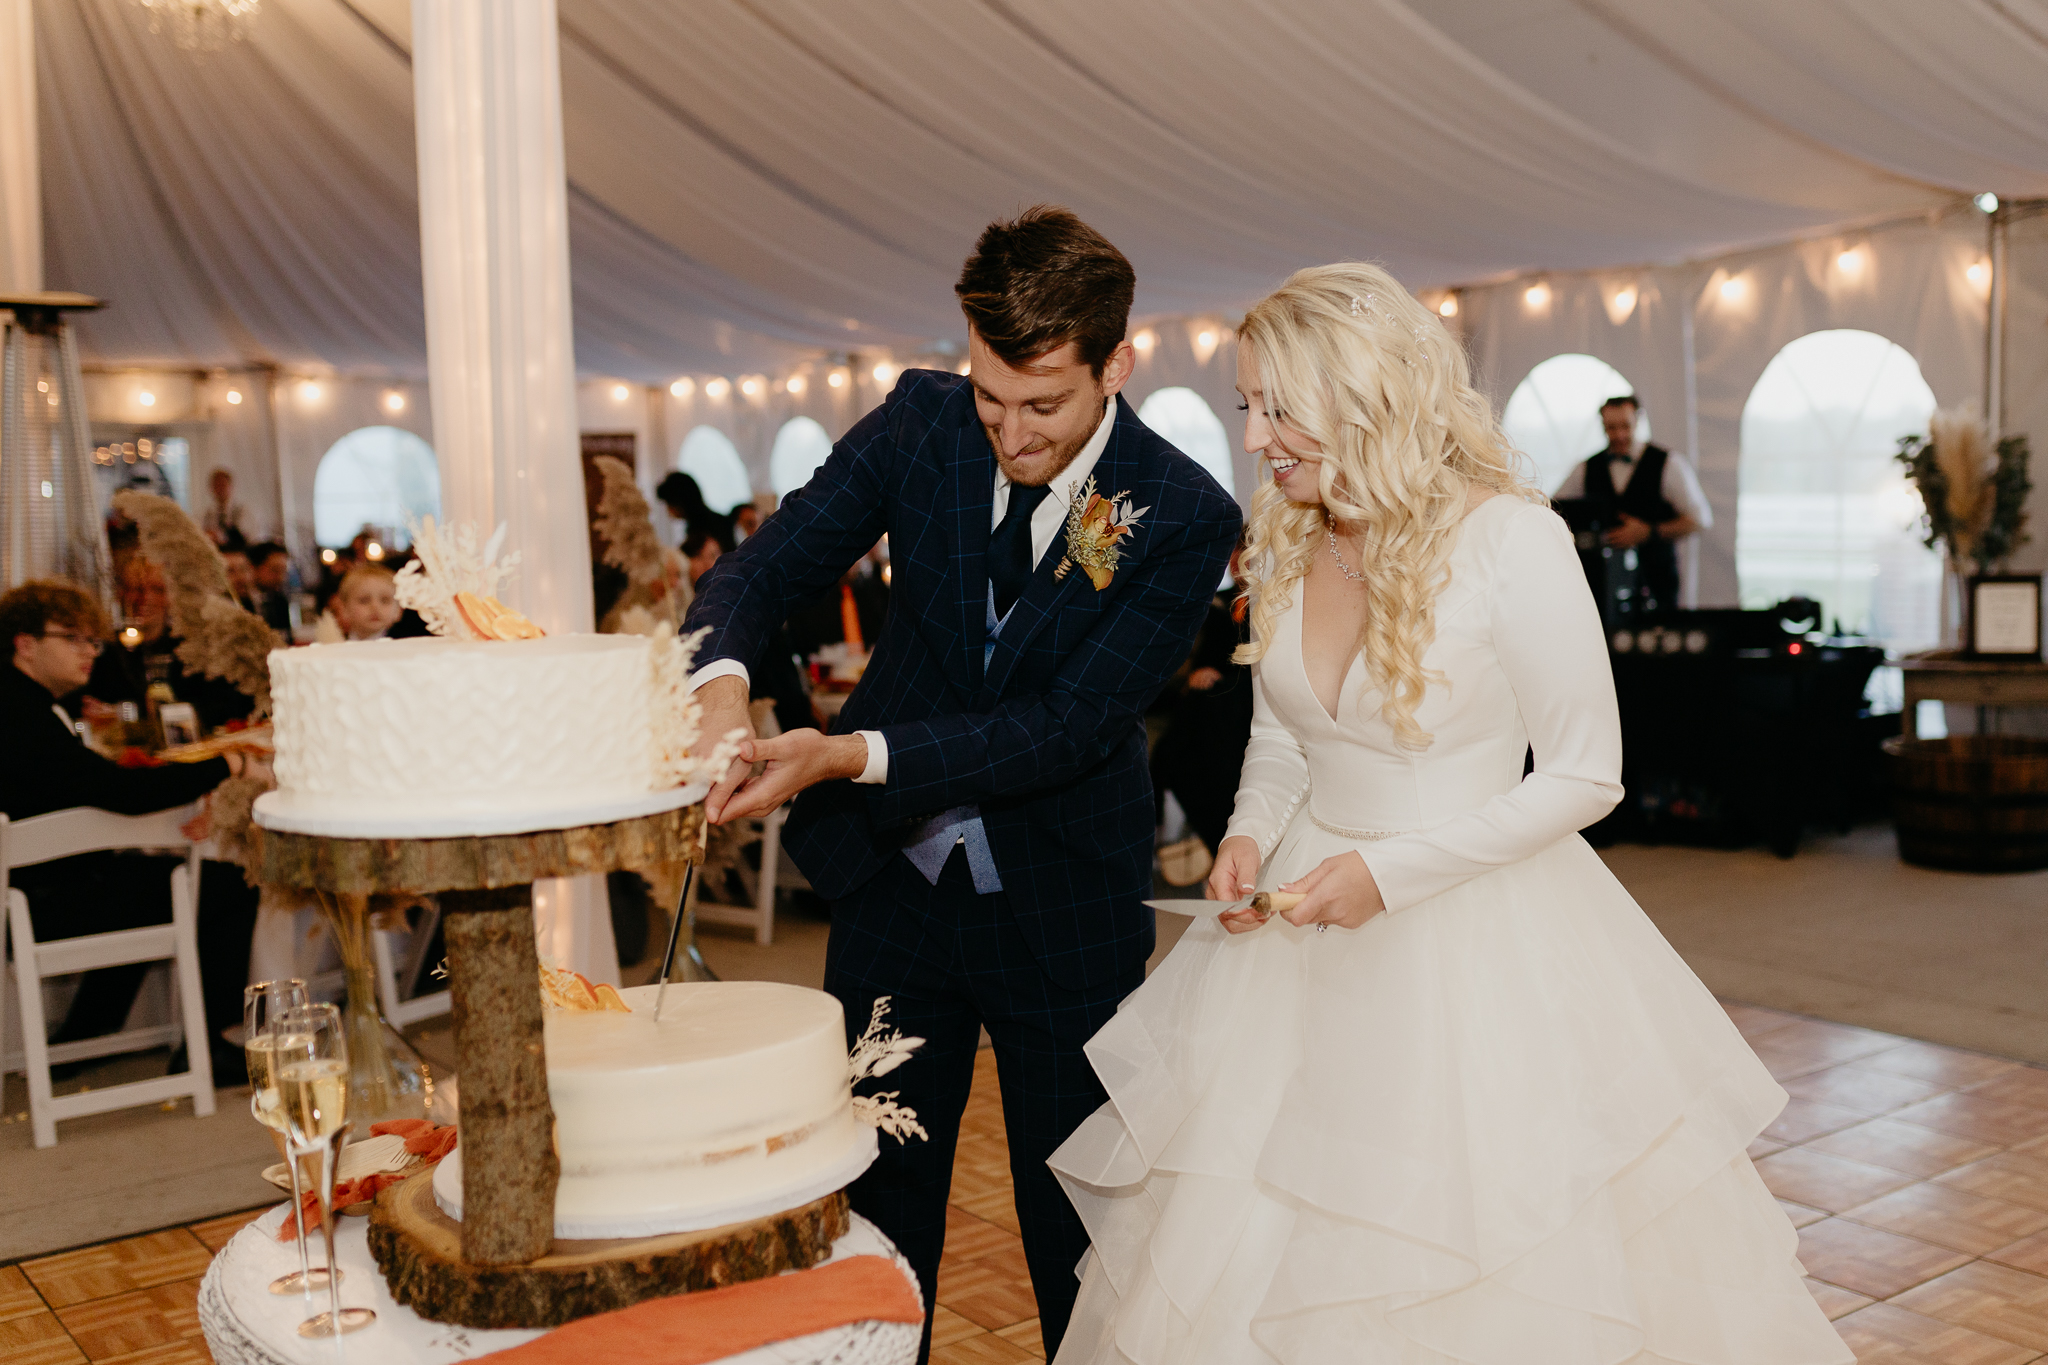 Bride and groom cut cake together in a white tent during their October wedding reception